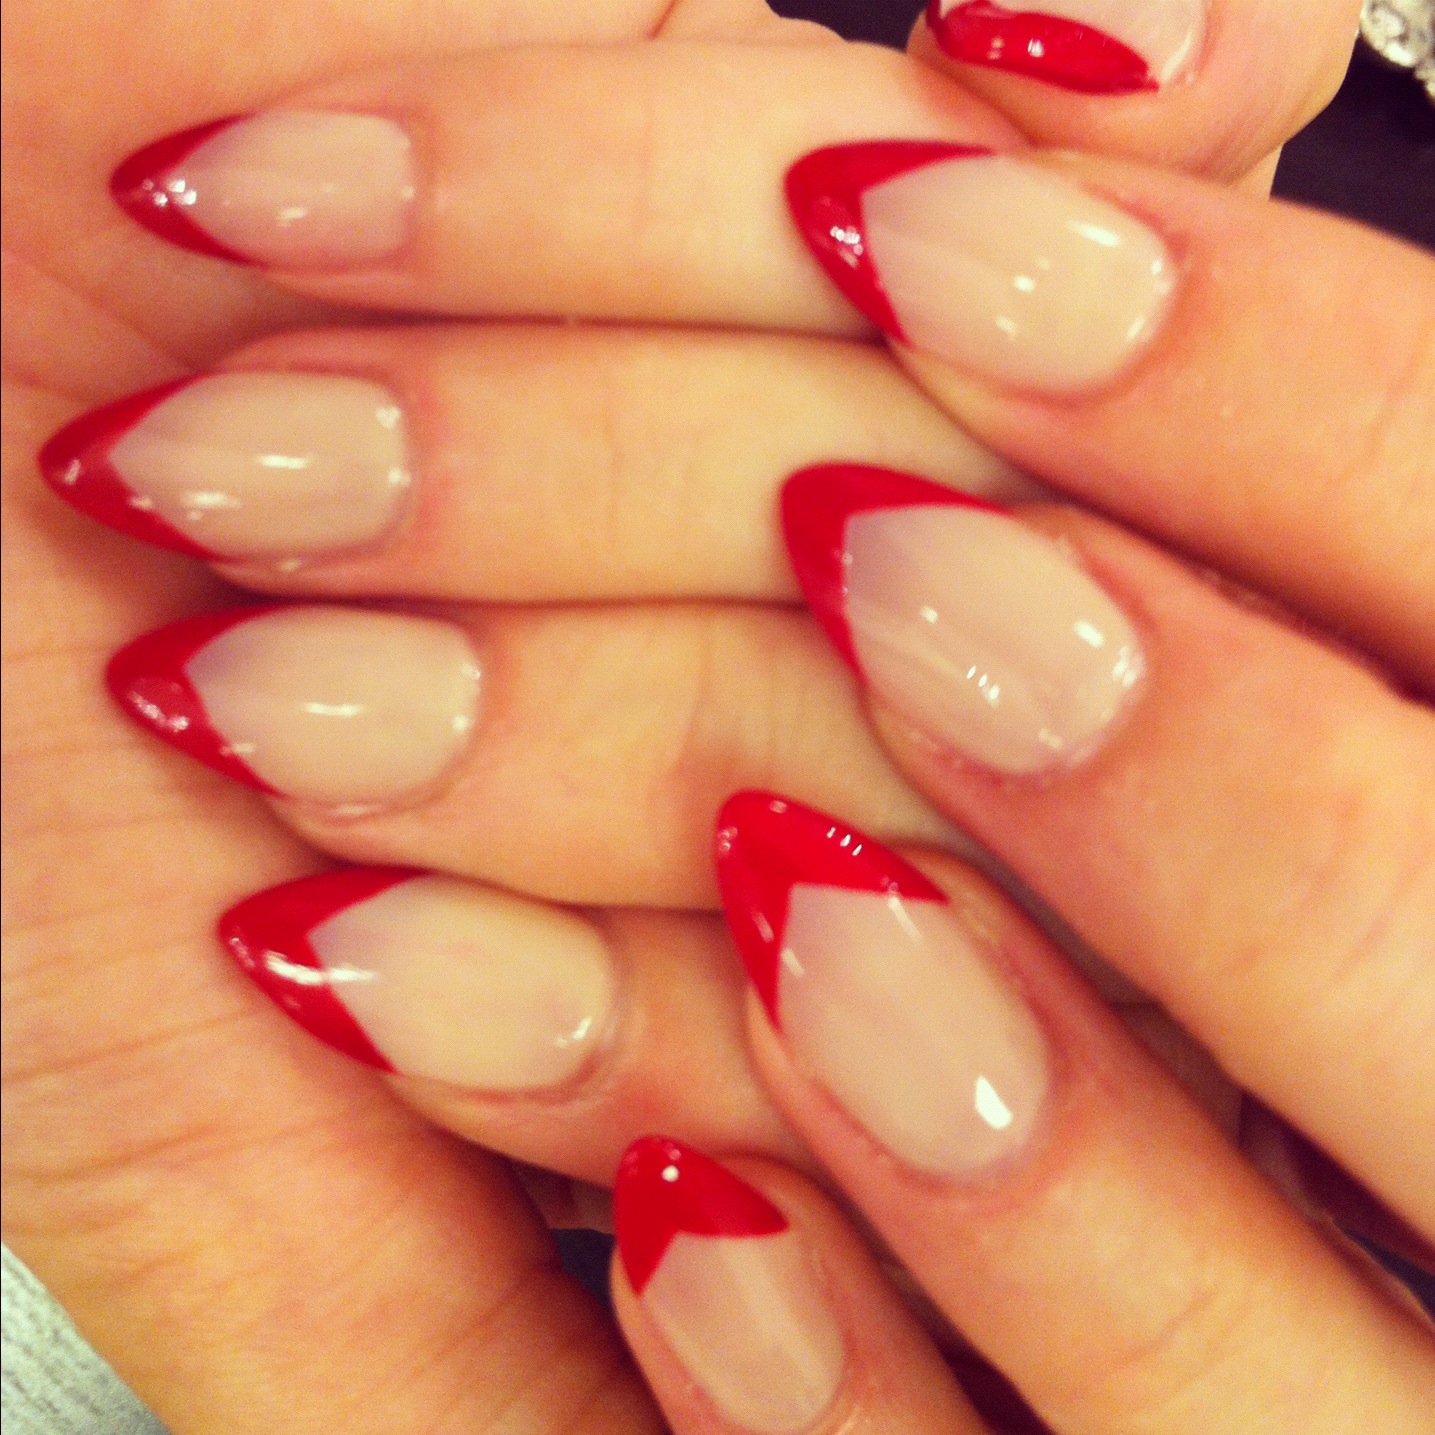 Getting Nailed: Experimenting With Stiletto Nails